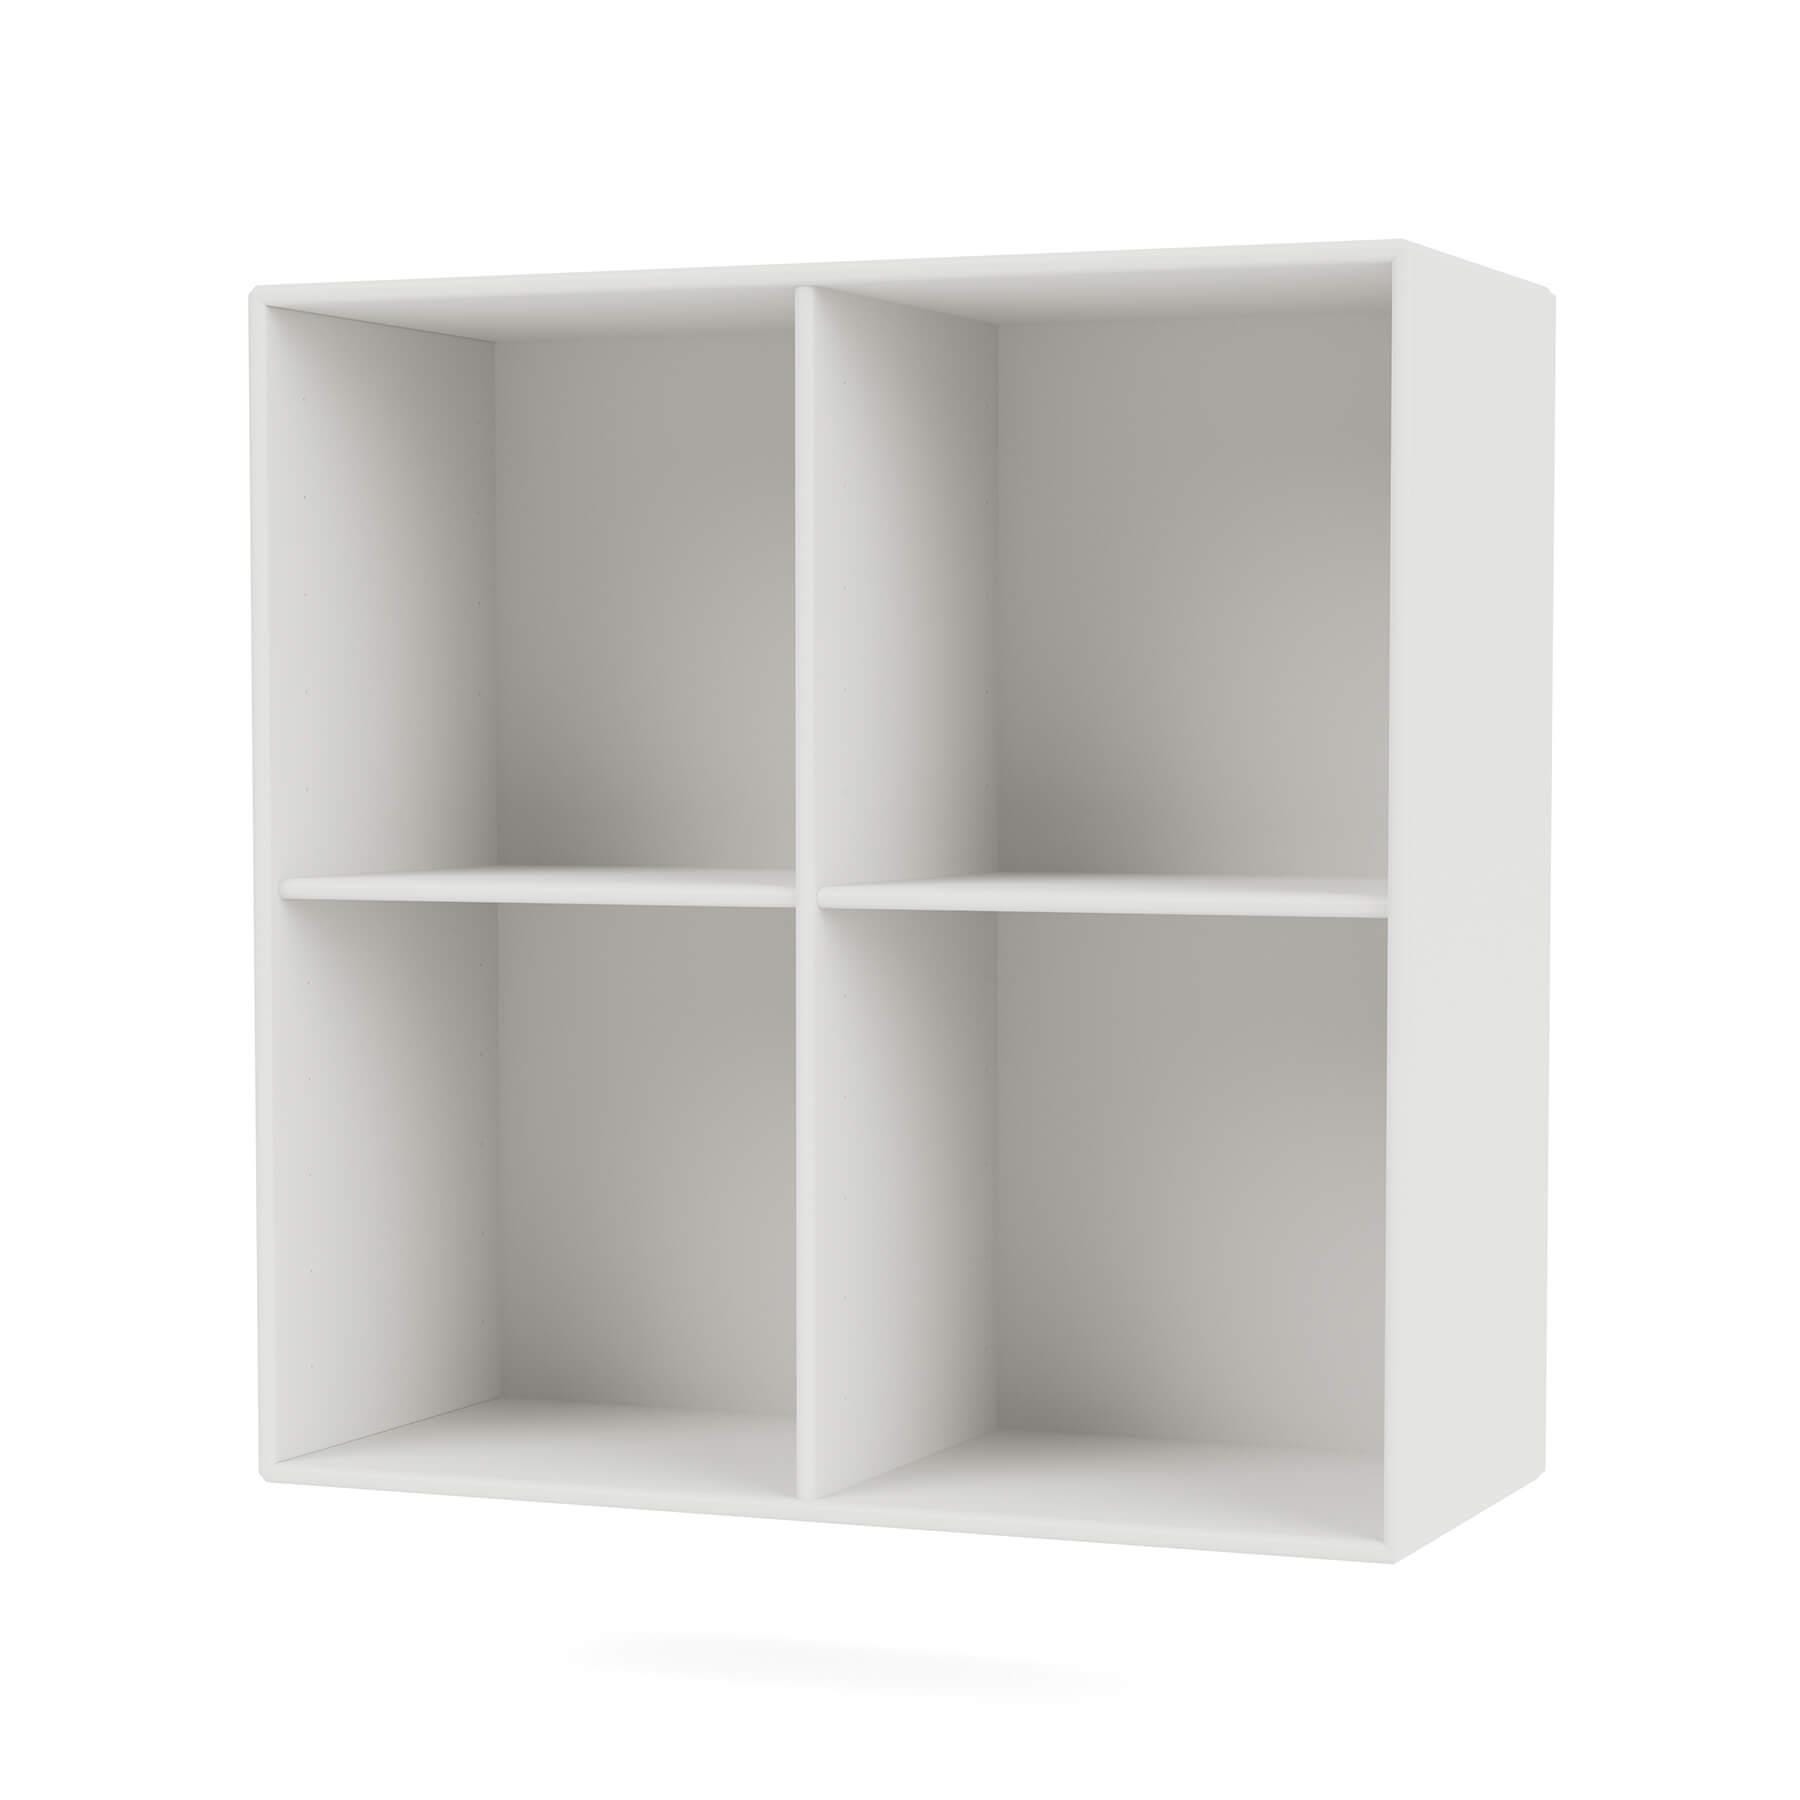 Montana Show Bookcase White Wall Mounted White Designer Furniture From Holloways Of Ludlow